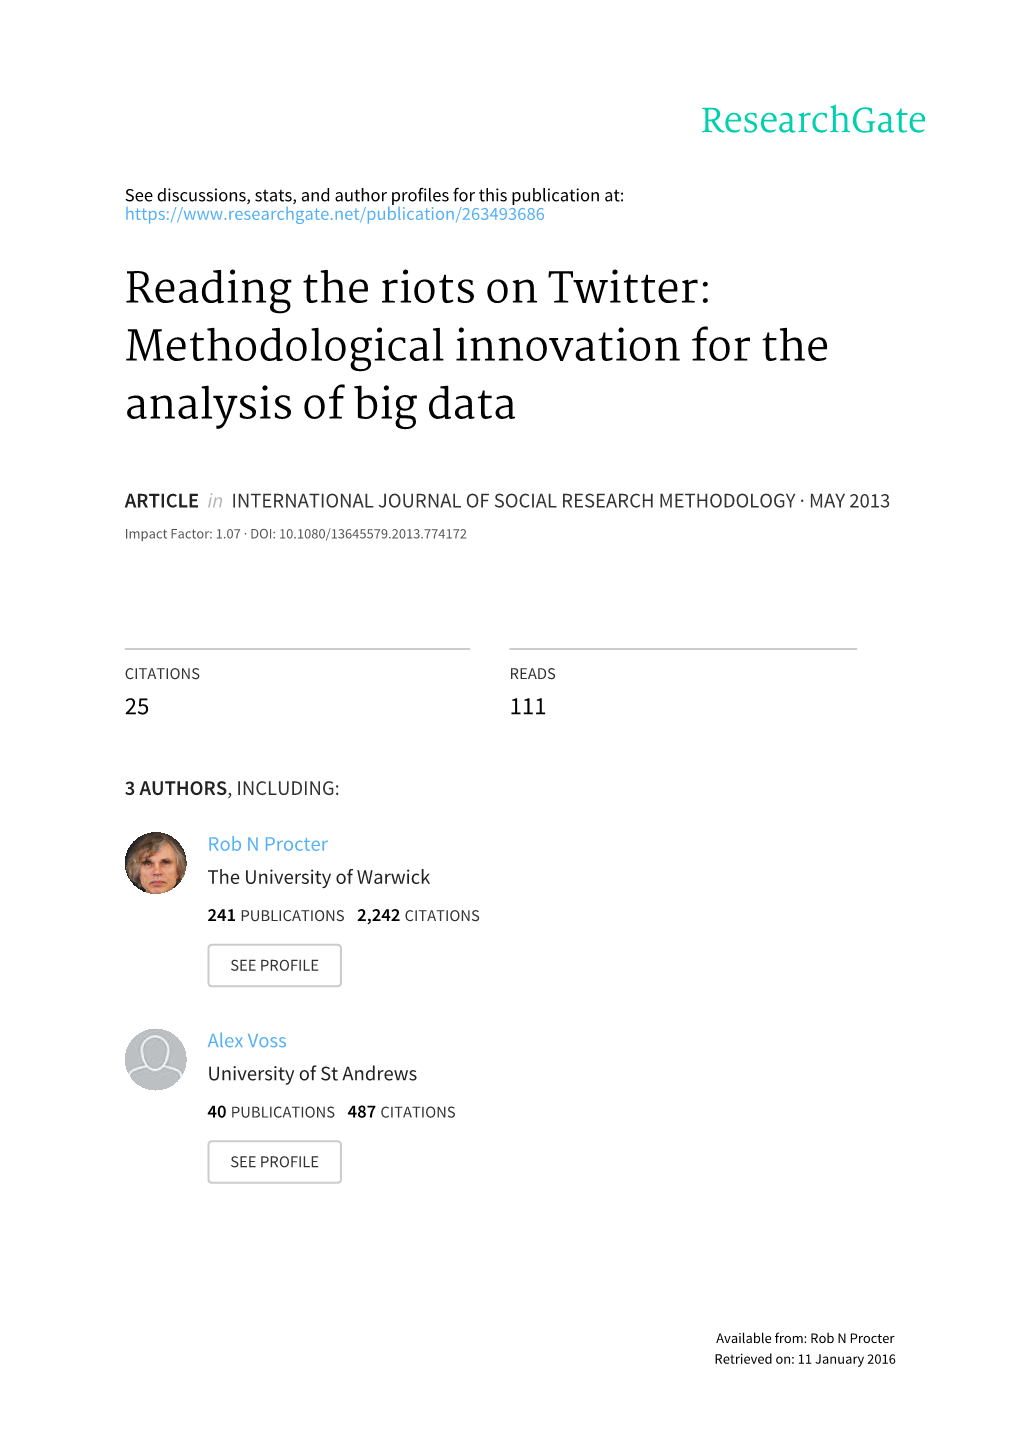 Reading the Riots on Twitter: Methodological Innovation for the Analysis of Big Data